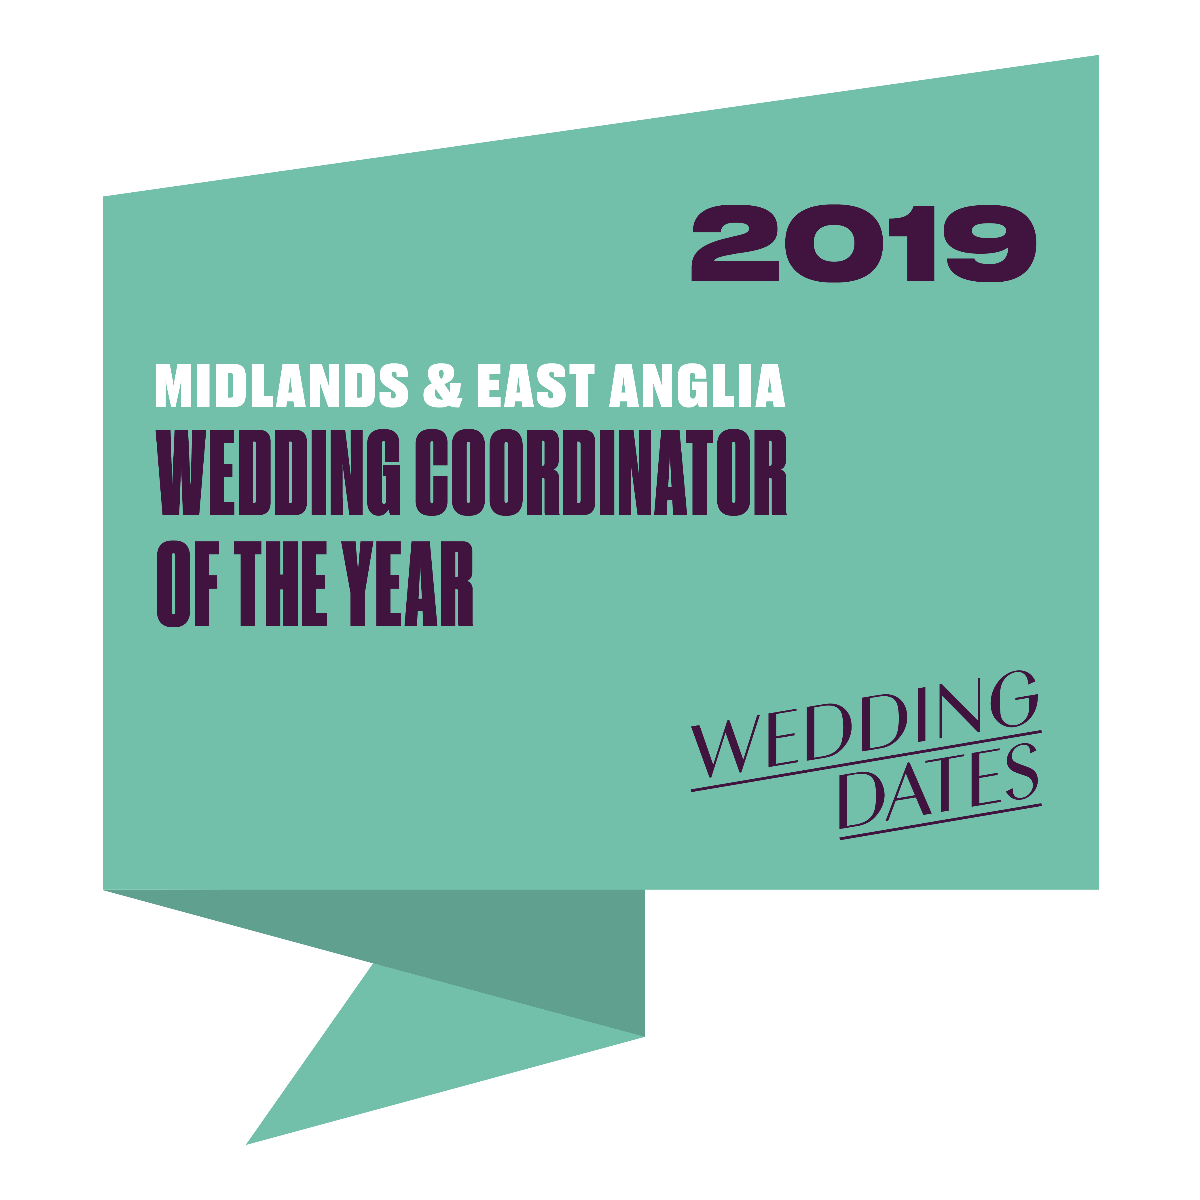 Wedding Co-ordinator of the Year for West Midlands 2019 